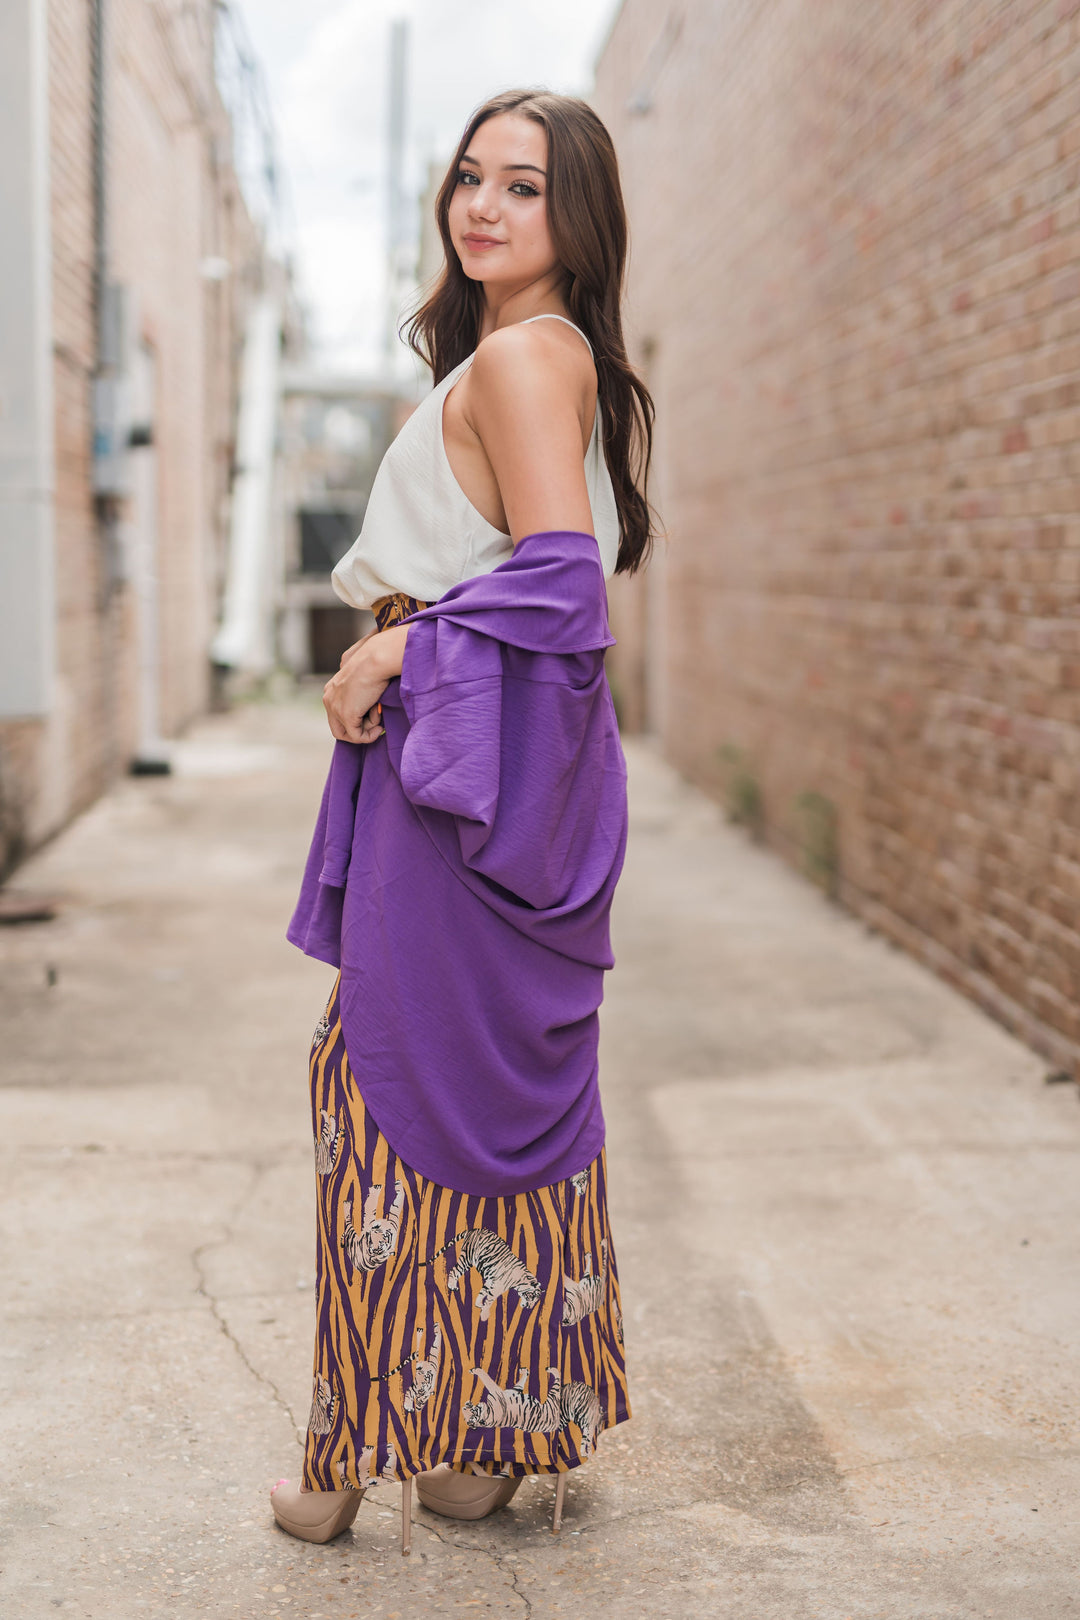 Cora Flowy LSU Pants-Pants-Adrienne-Shop with Bloom West Boutique, Women's Fashion Boutique, Located in Houma, Louisiana